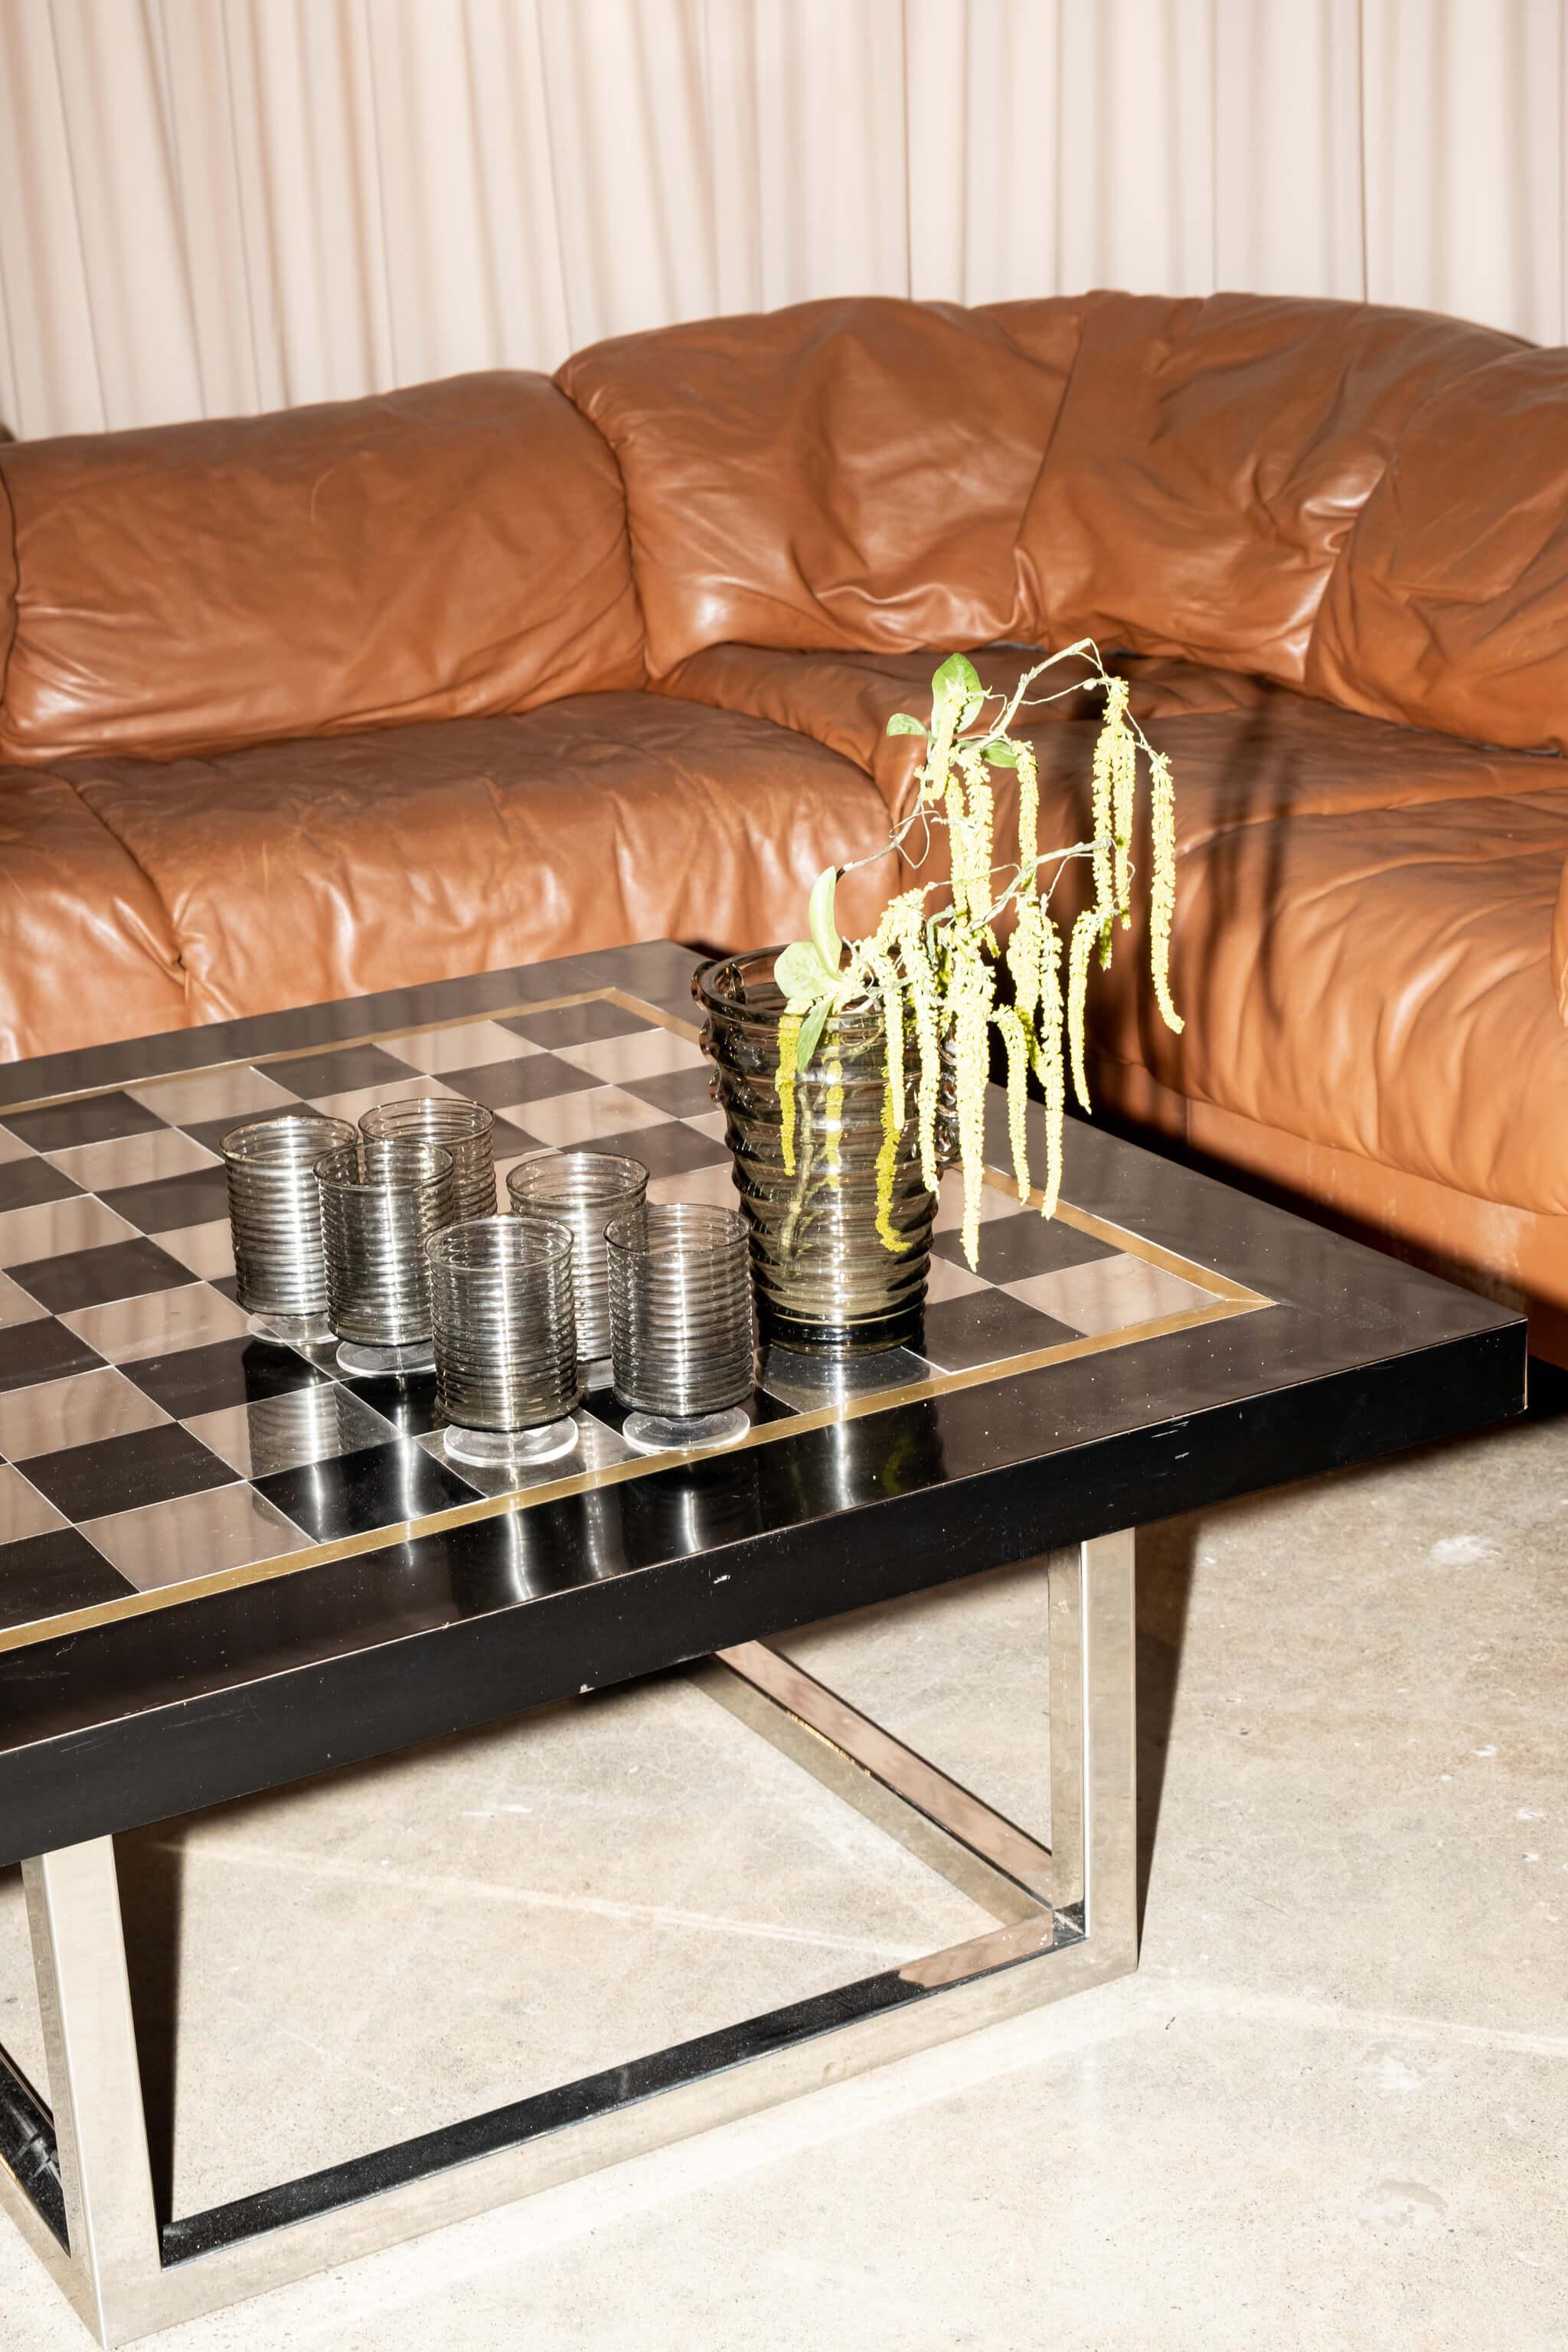 Romeo Rega's 1970s Italian coffee table features a black and chrome chessboard top with gold border that sits neatly on its chrome base. Rega's glamorous sensibility, strongly evident in this design, is commonly associated with the Hollywood Regency